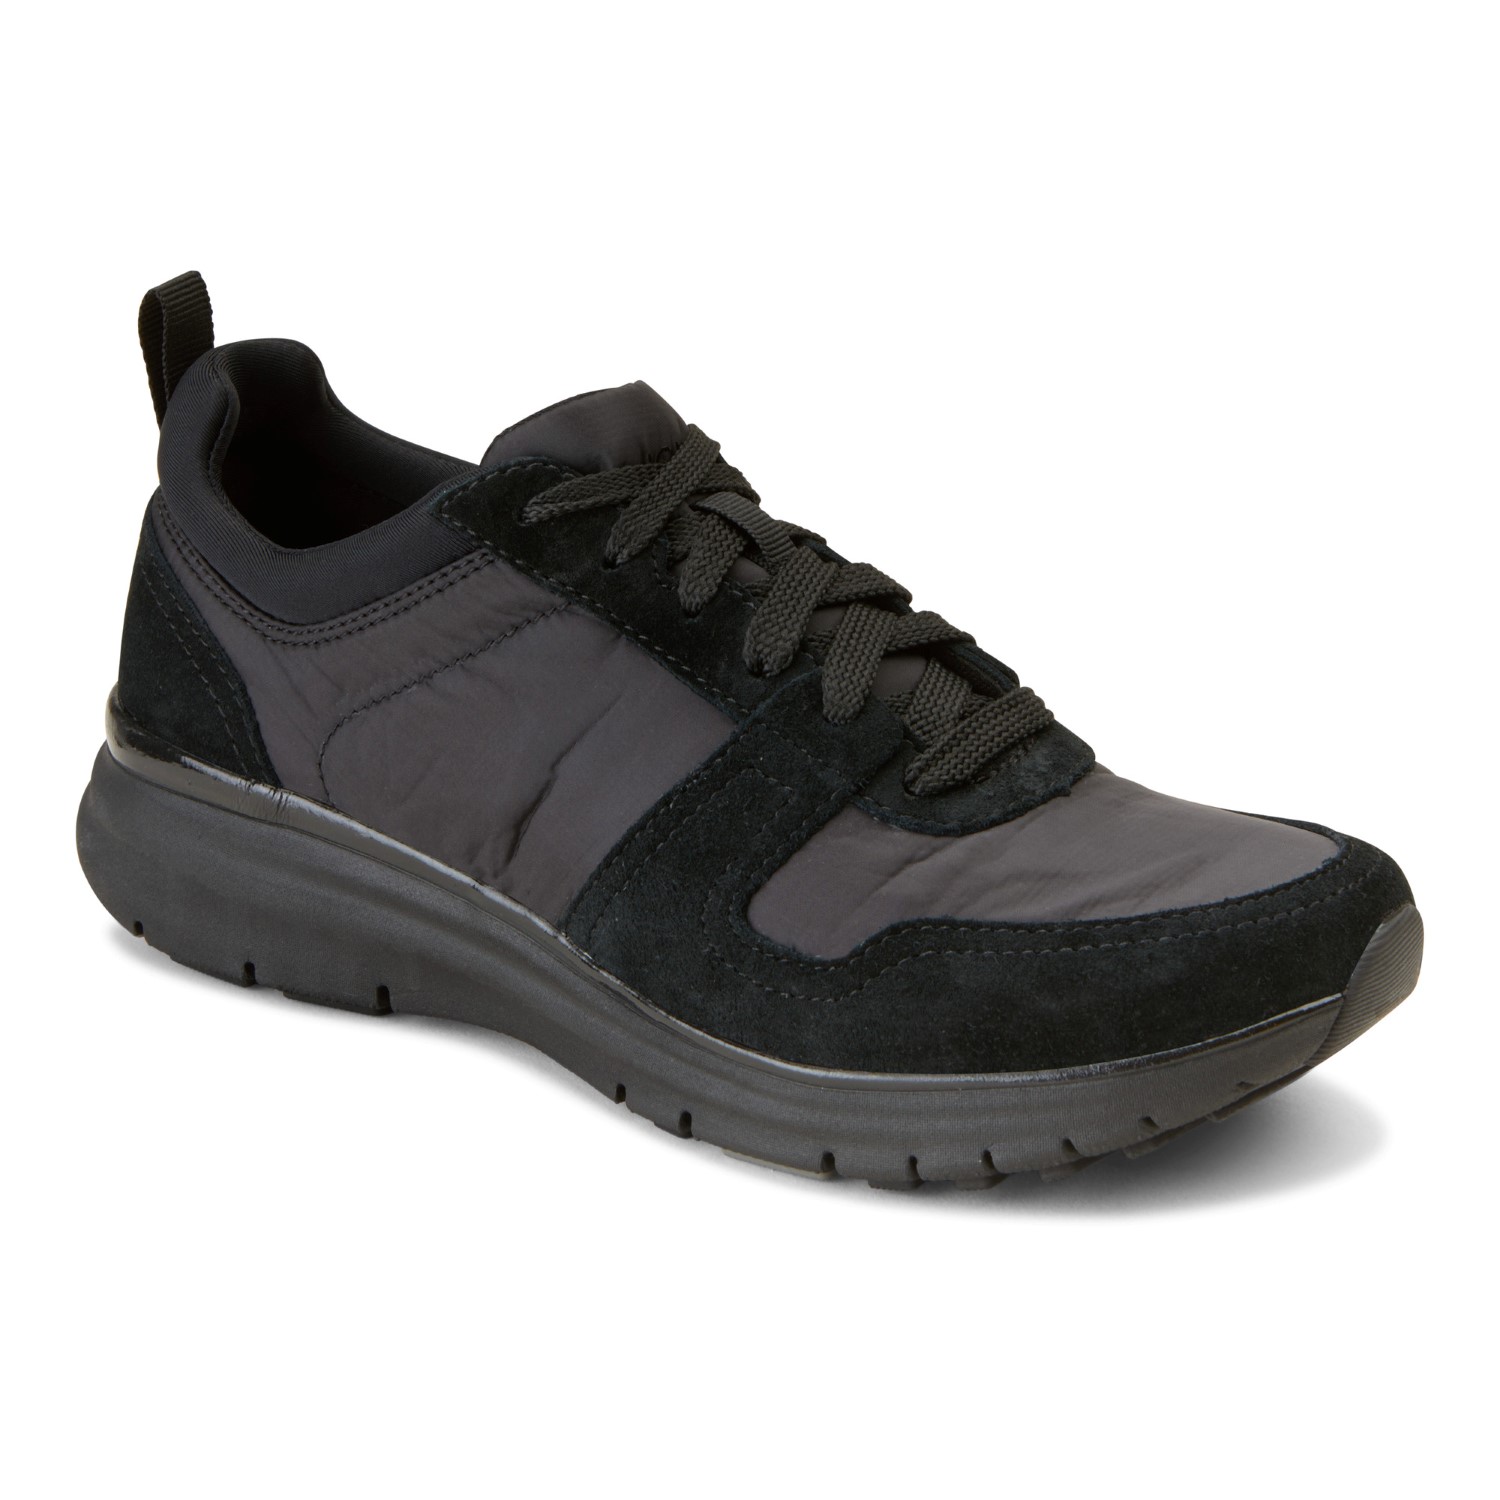 rei quilted wedge sneaker